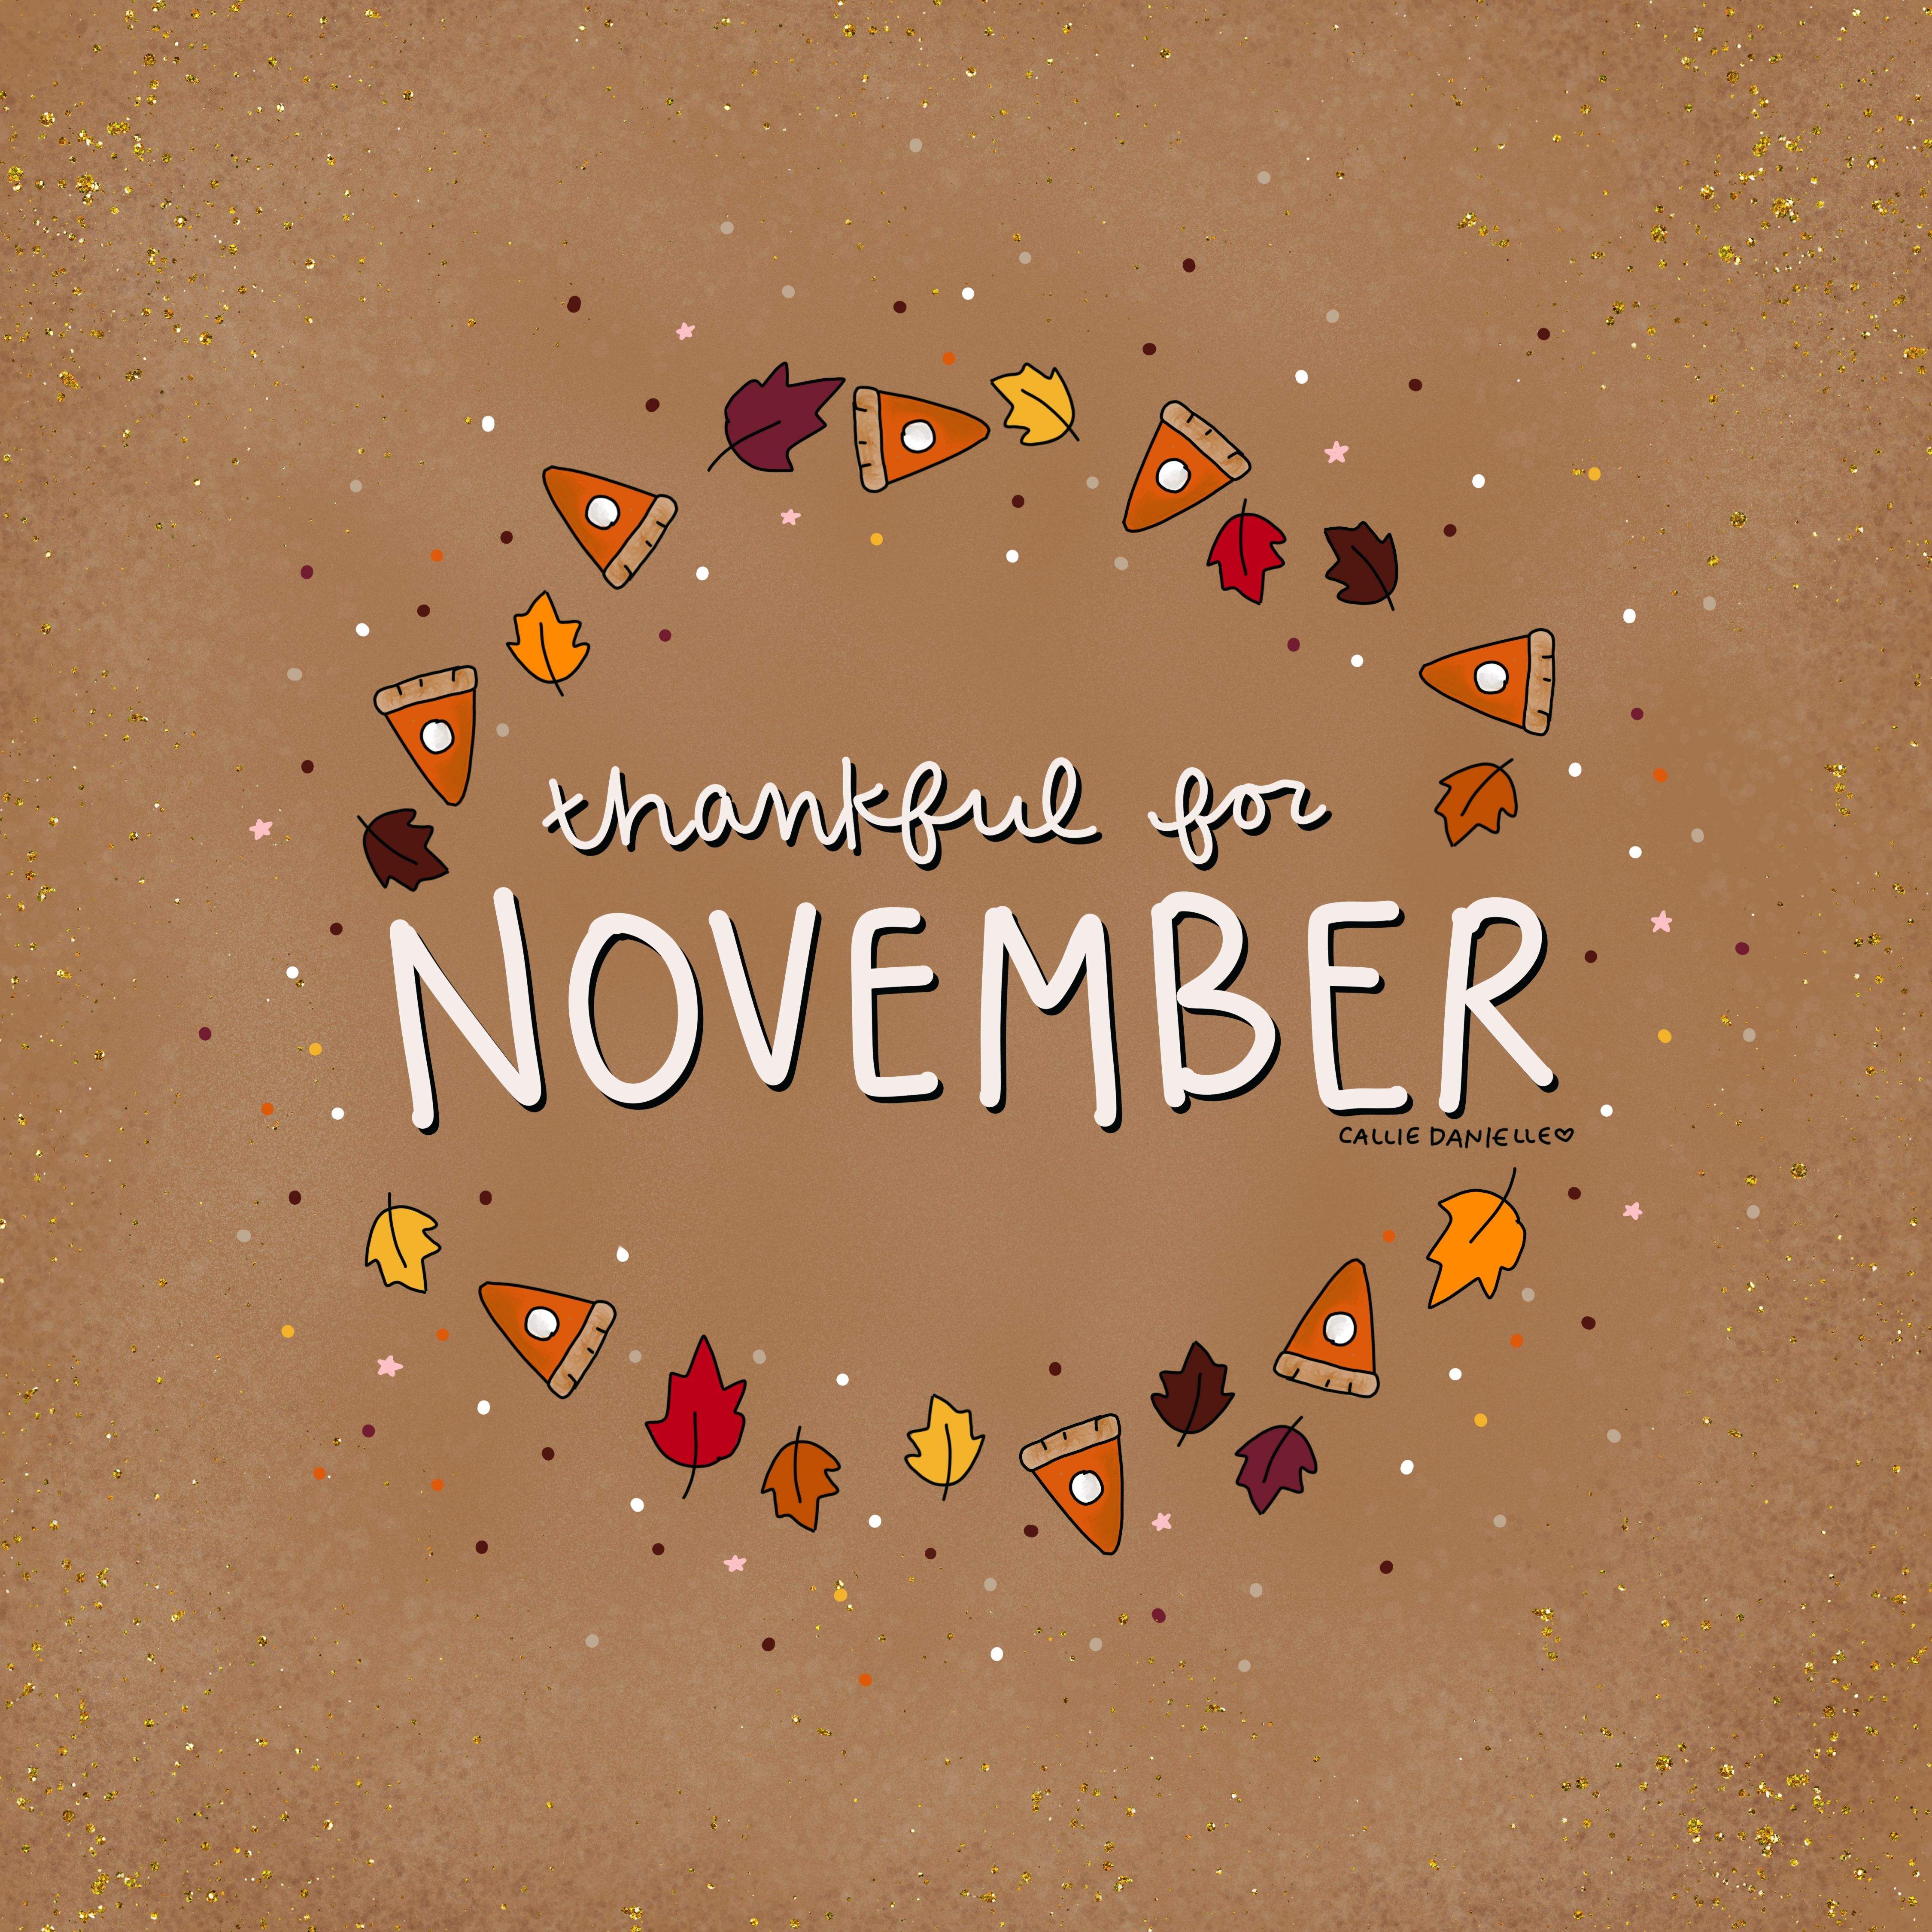 November Doodle Quote By Callie Danielle Hello Wele